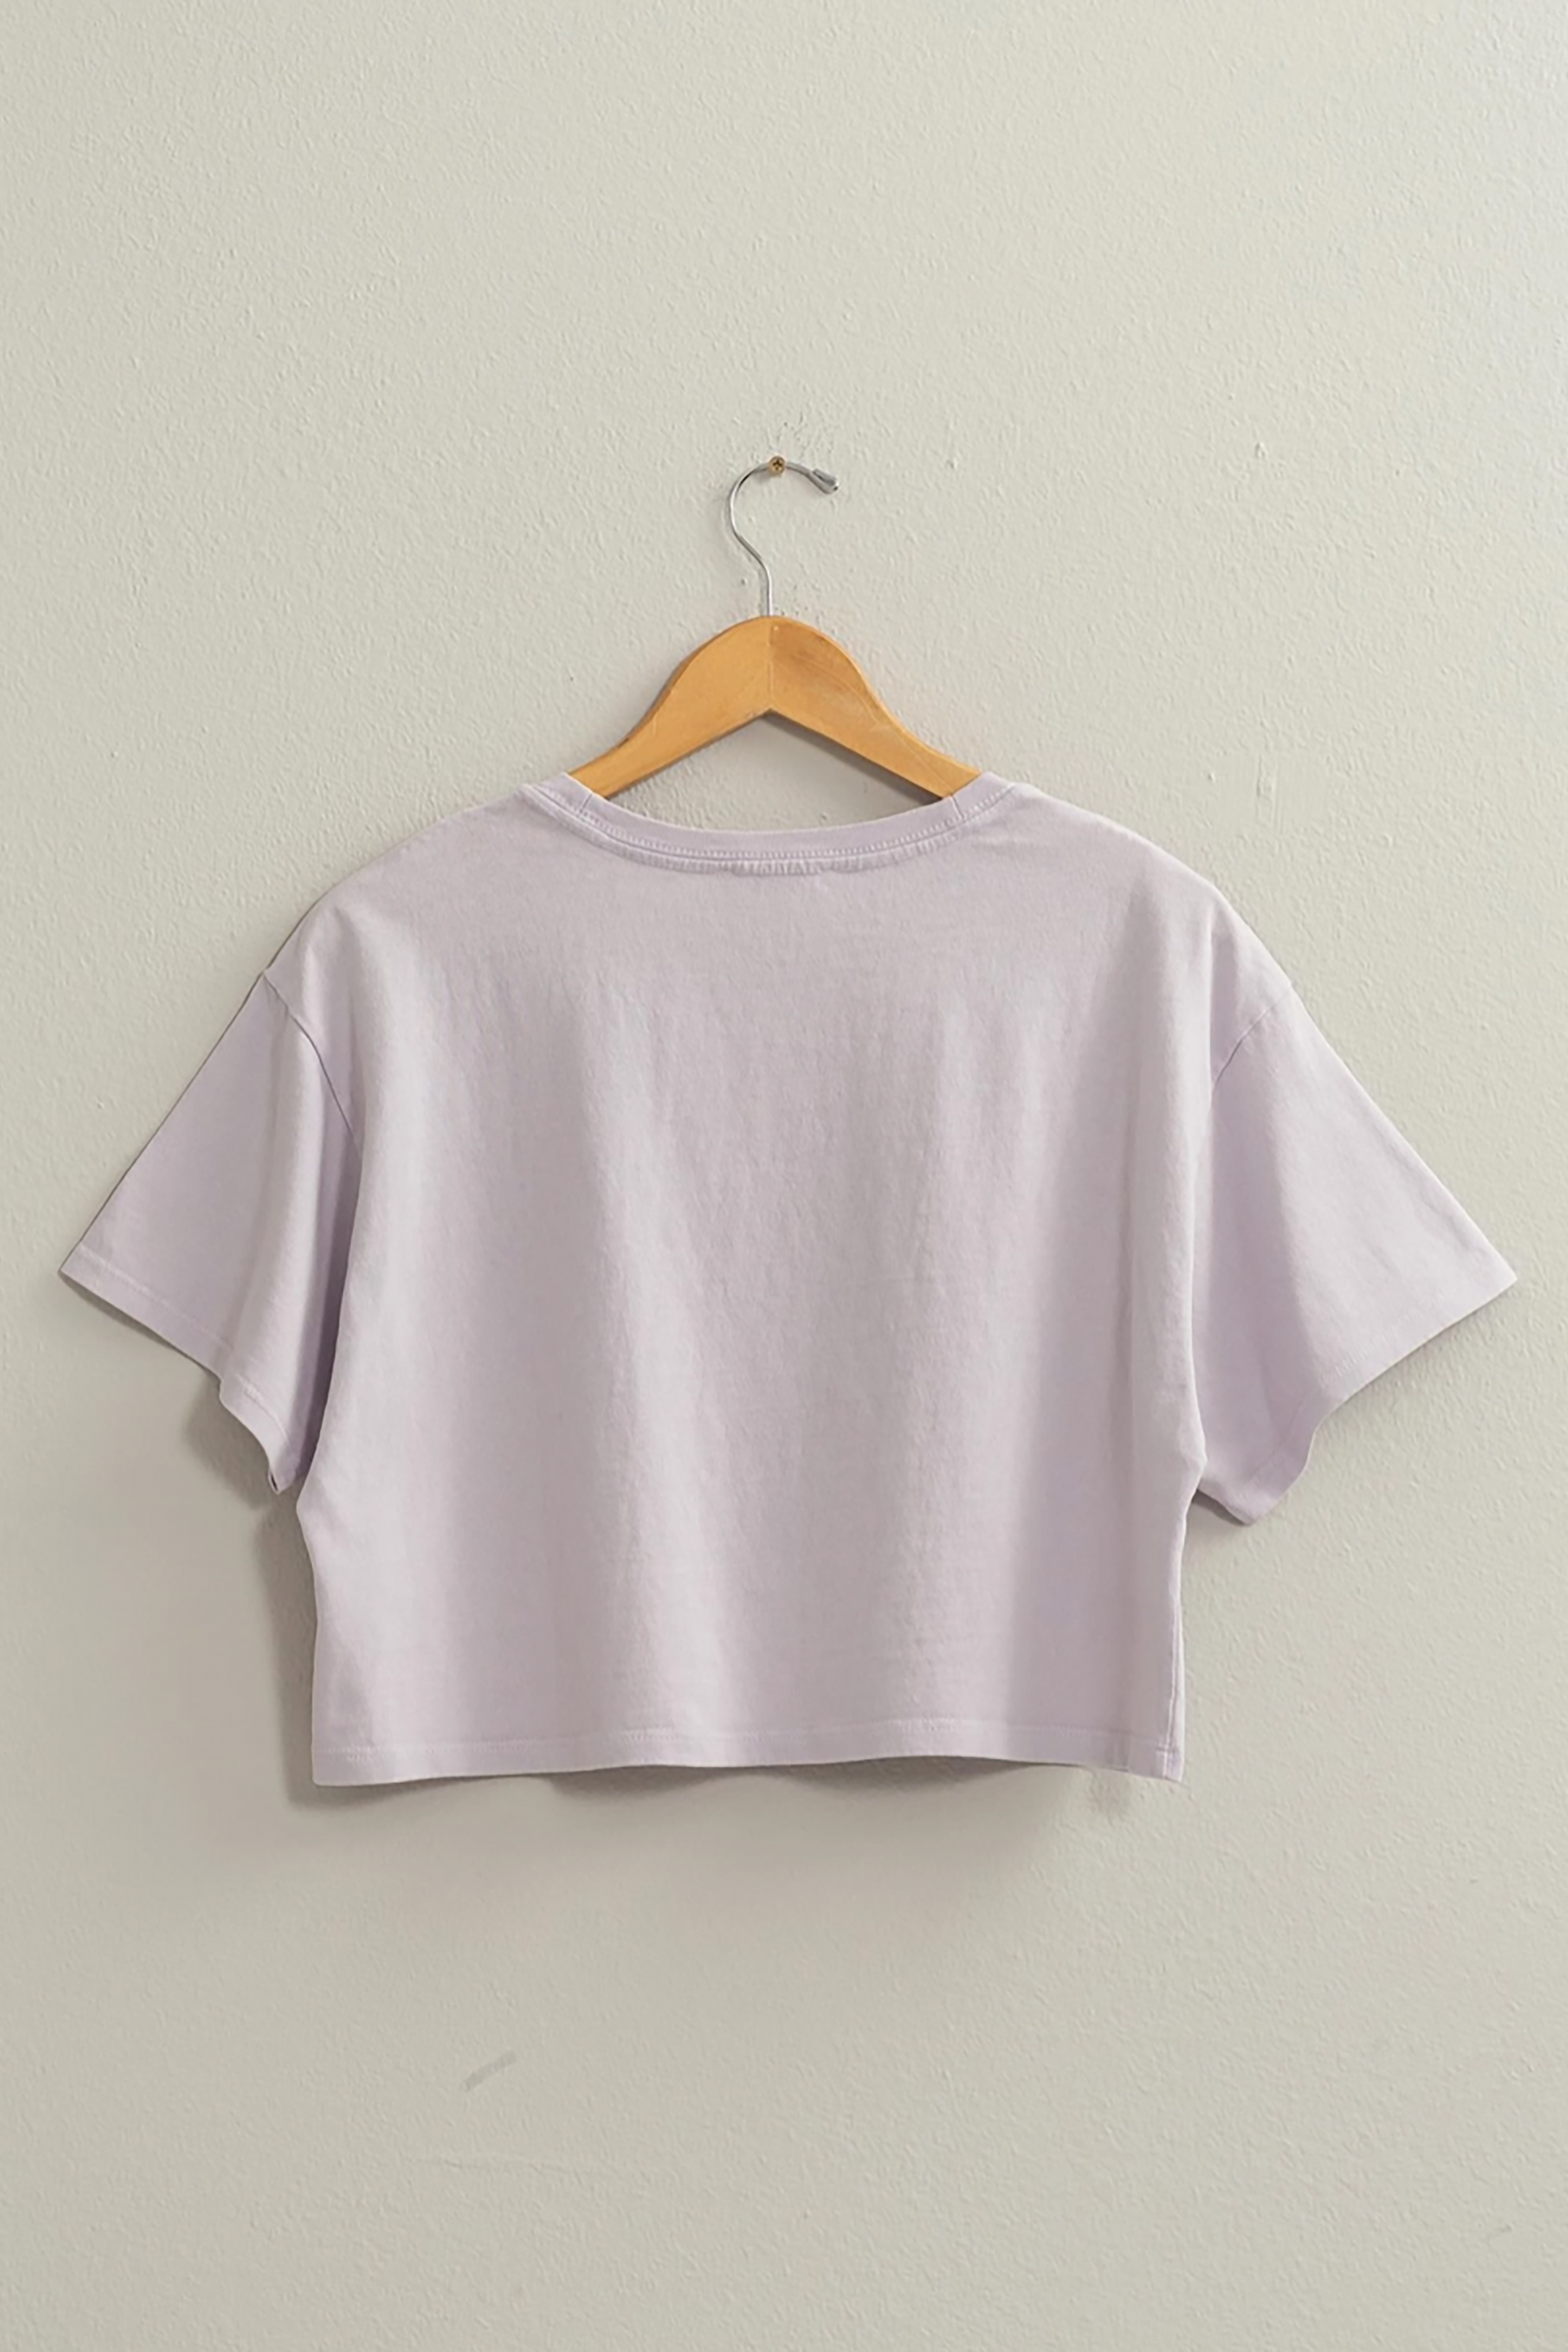 Boxy Cropped Tee in Lavender